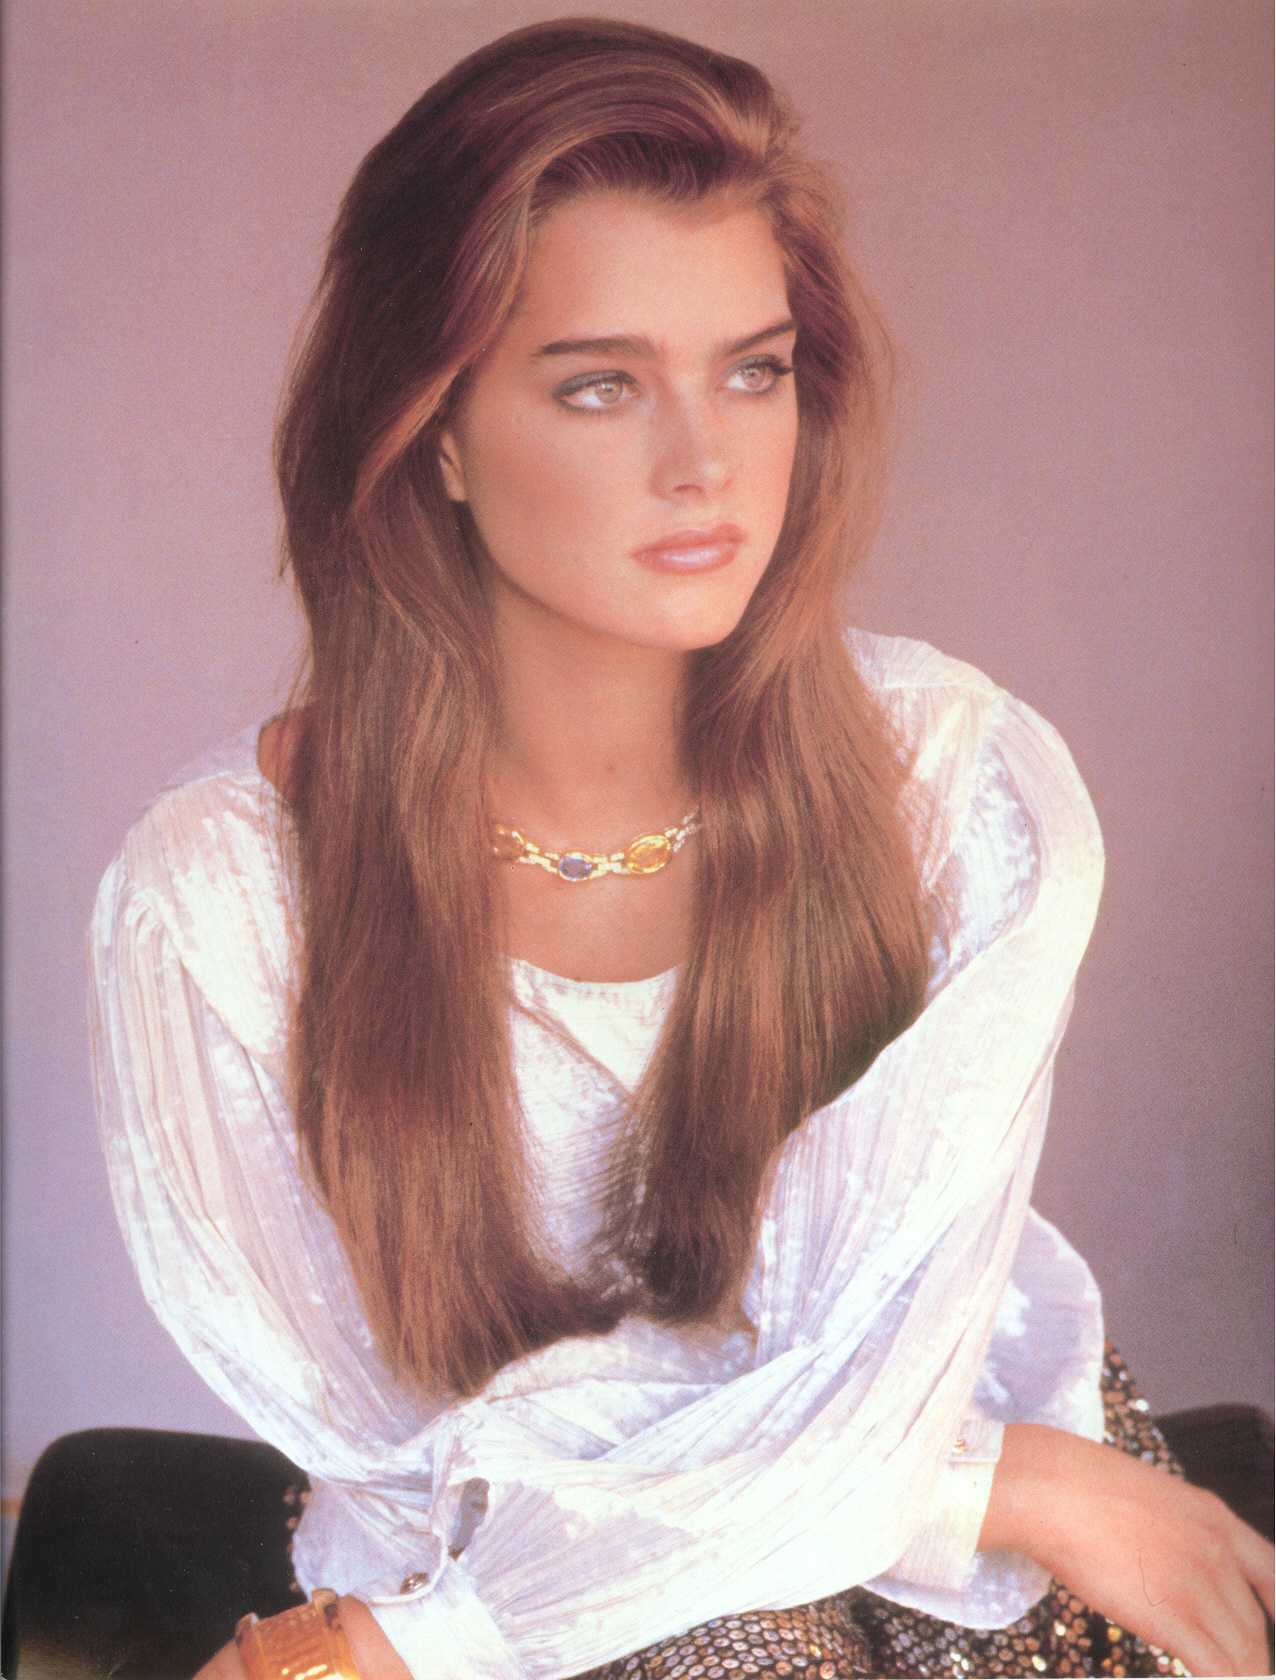 Images of Brooke Shields | 1276x1680